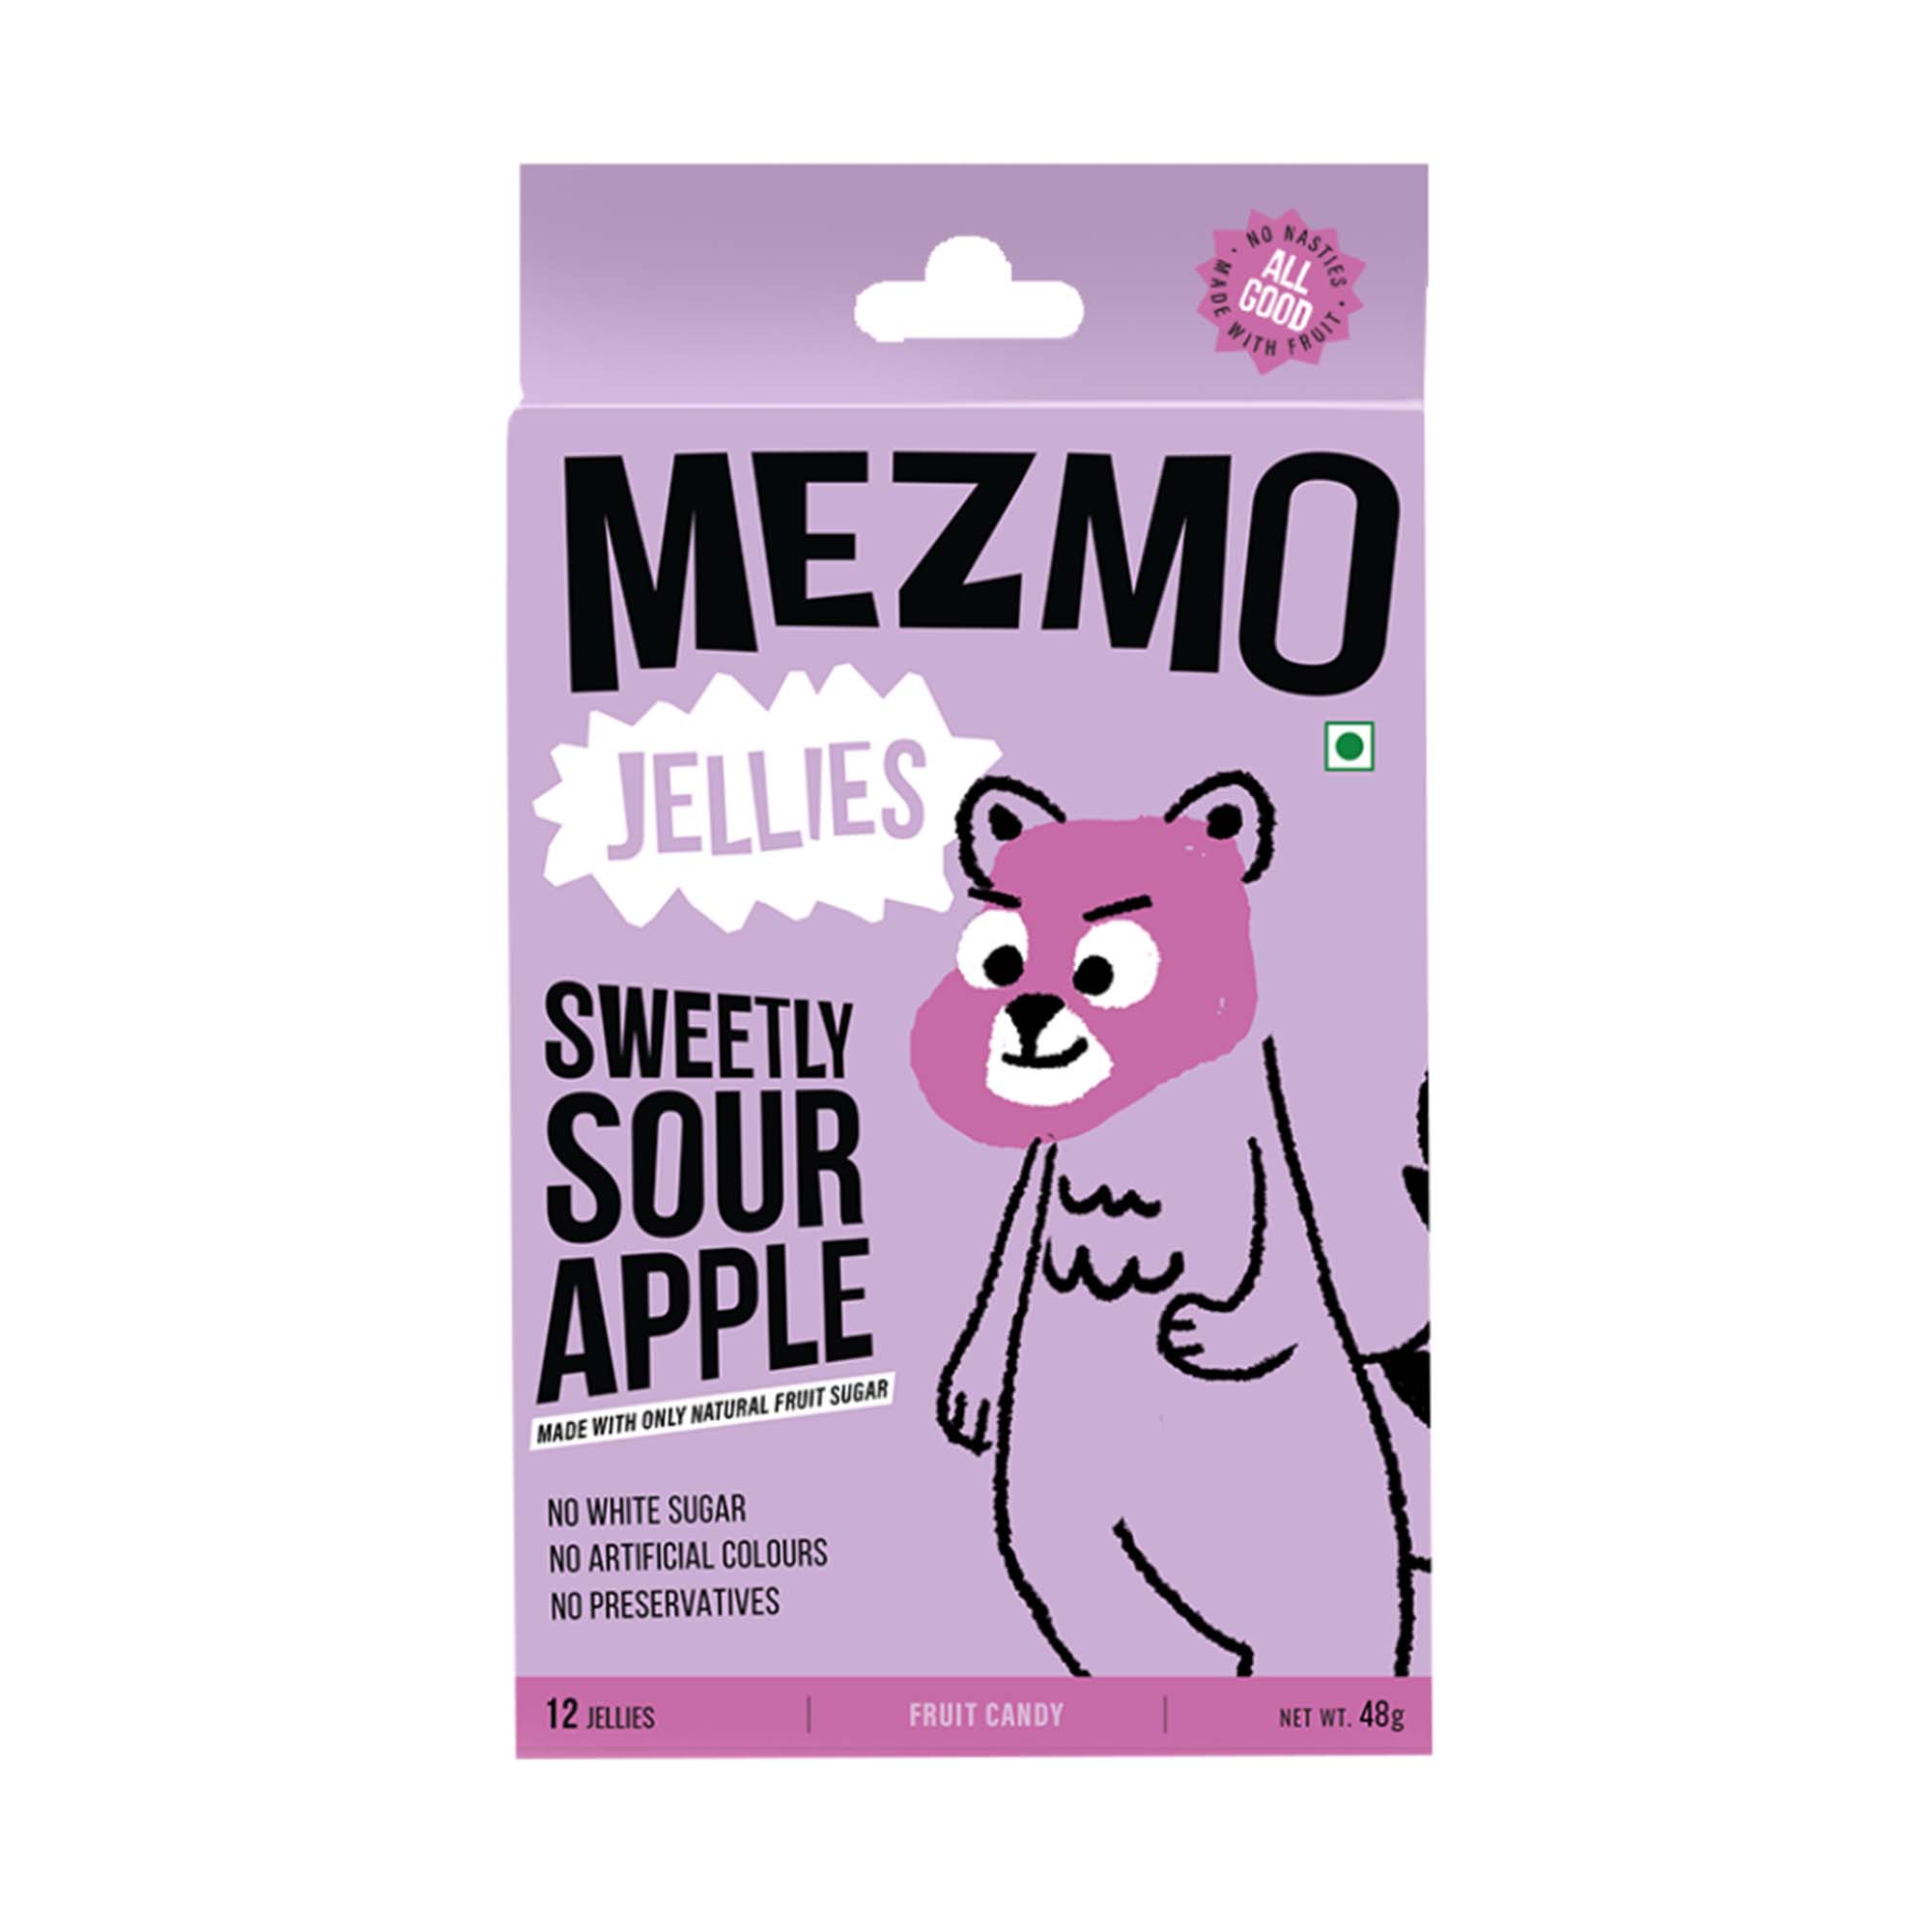 Mezmo Sweetly Sour Apple Pack of 3 ( 36 Jellies)